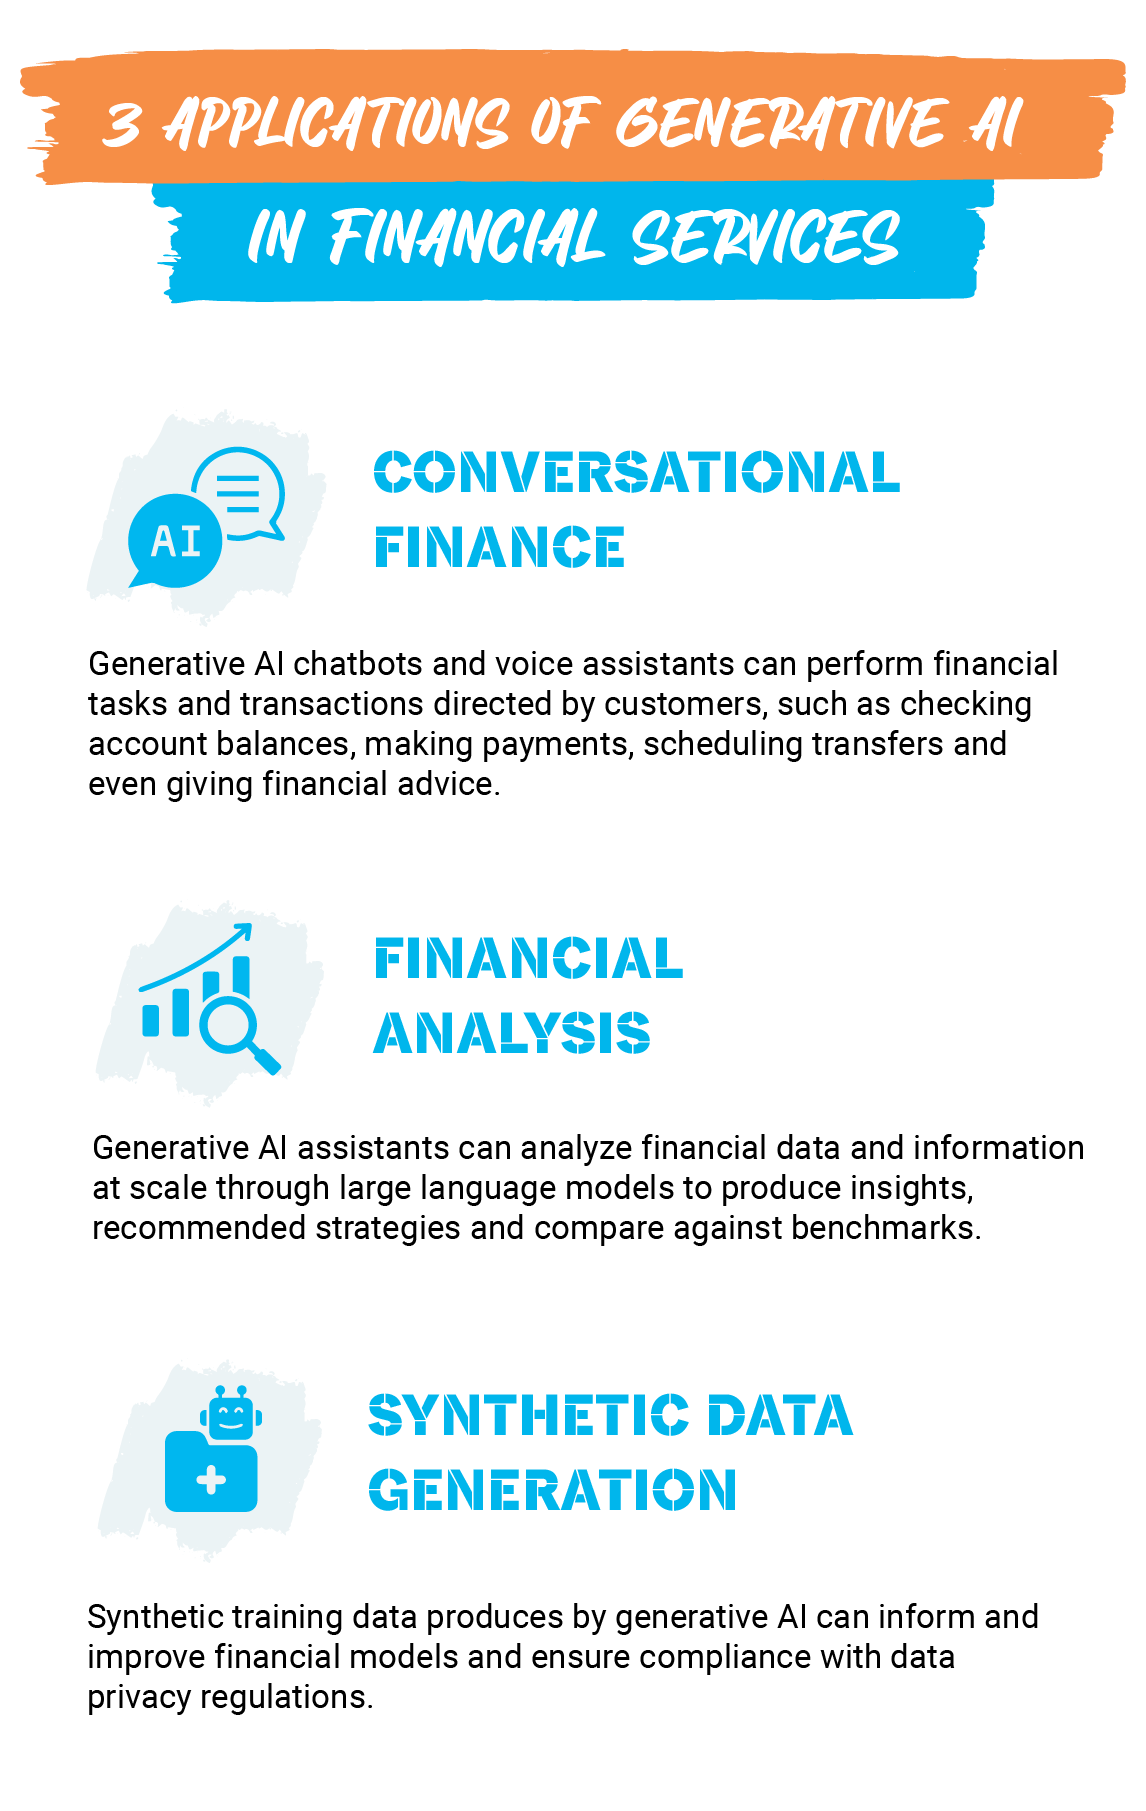 US mobile_3 applications of generative ai in financial services copy 2